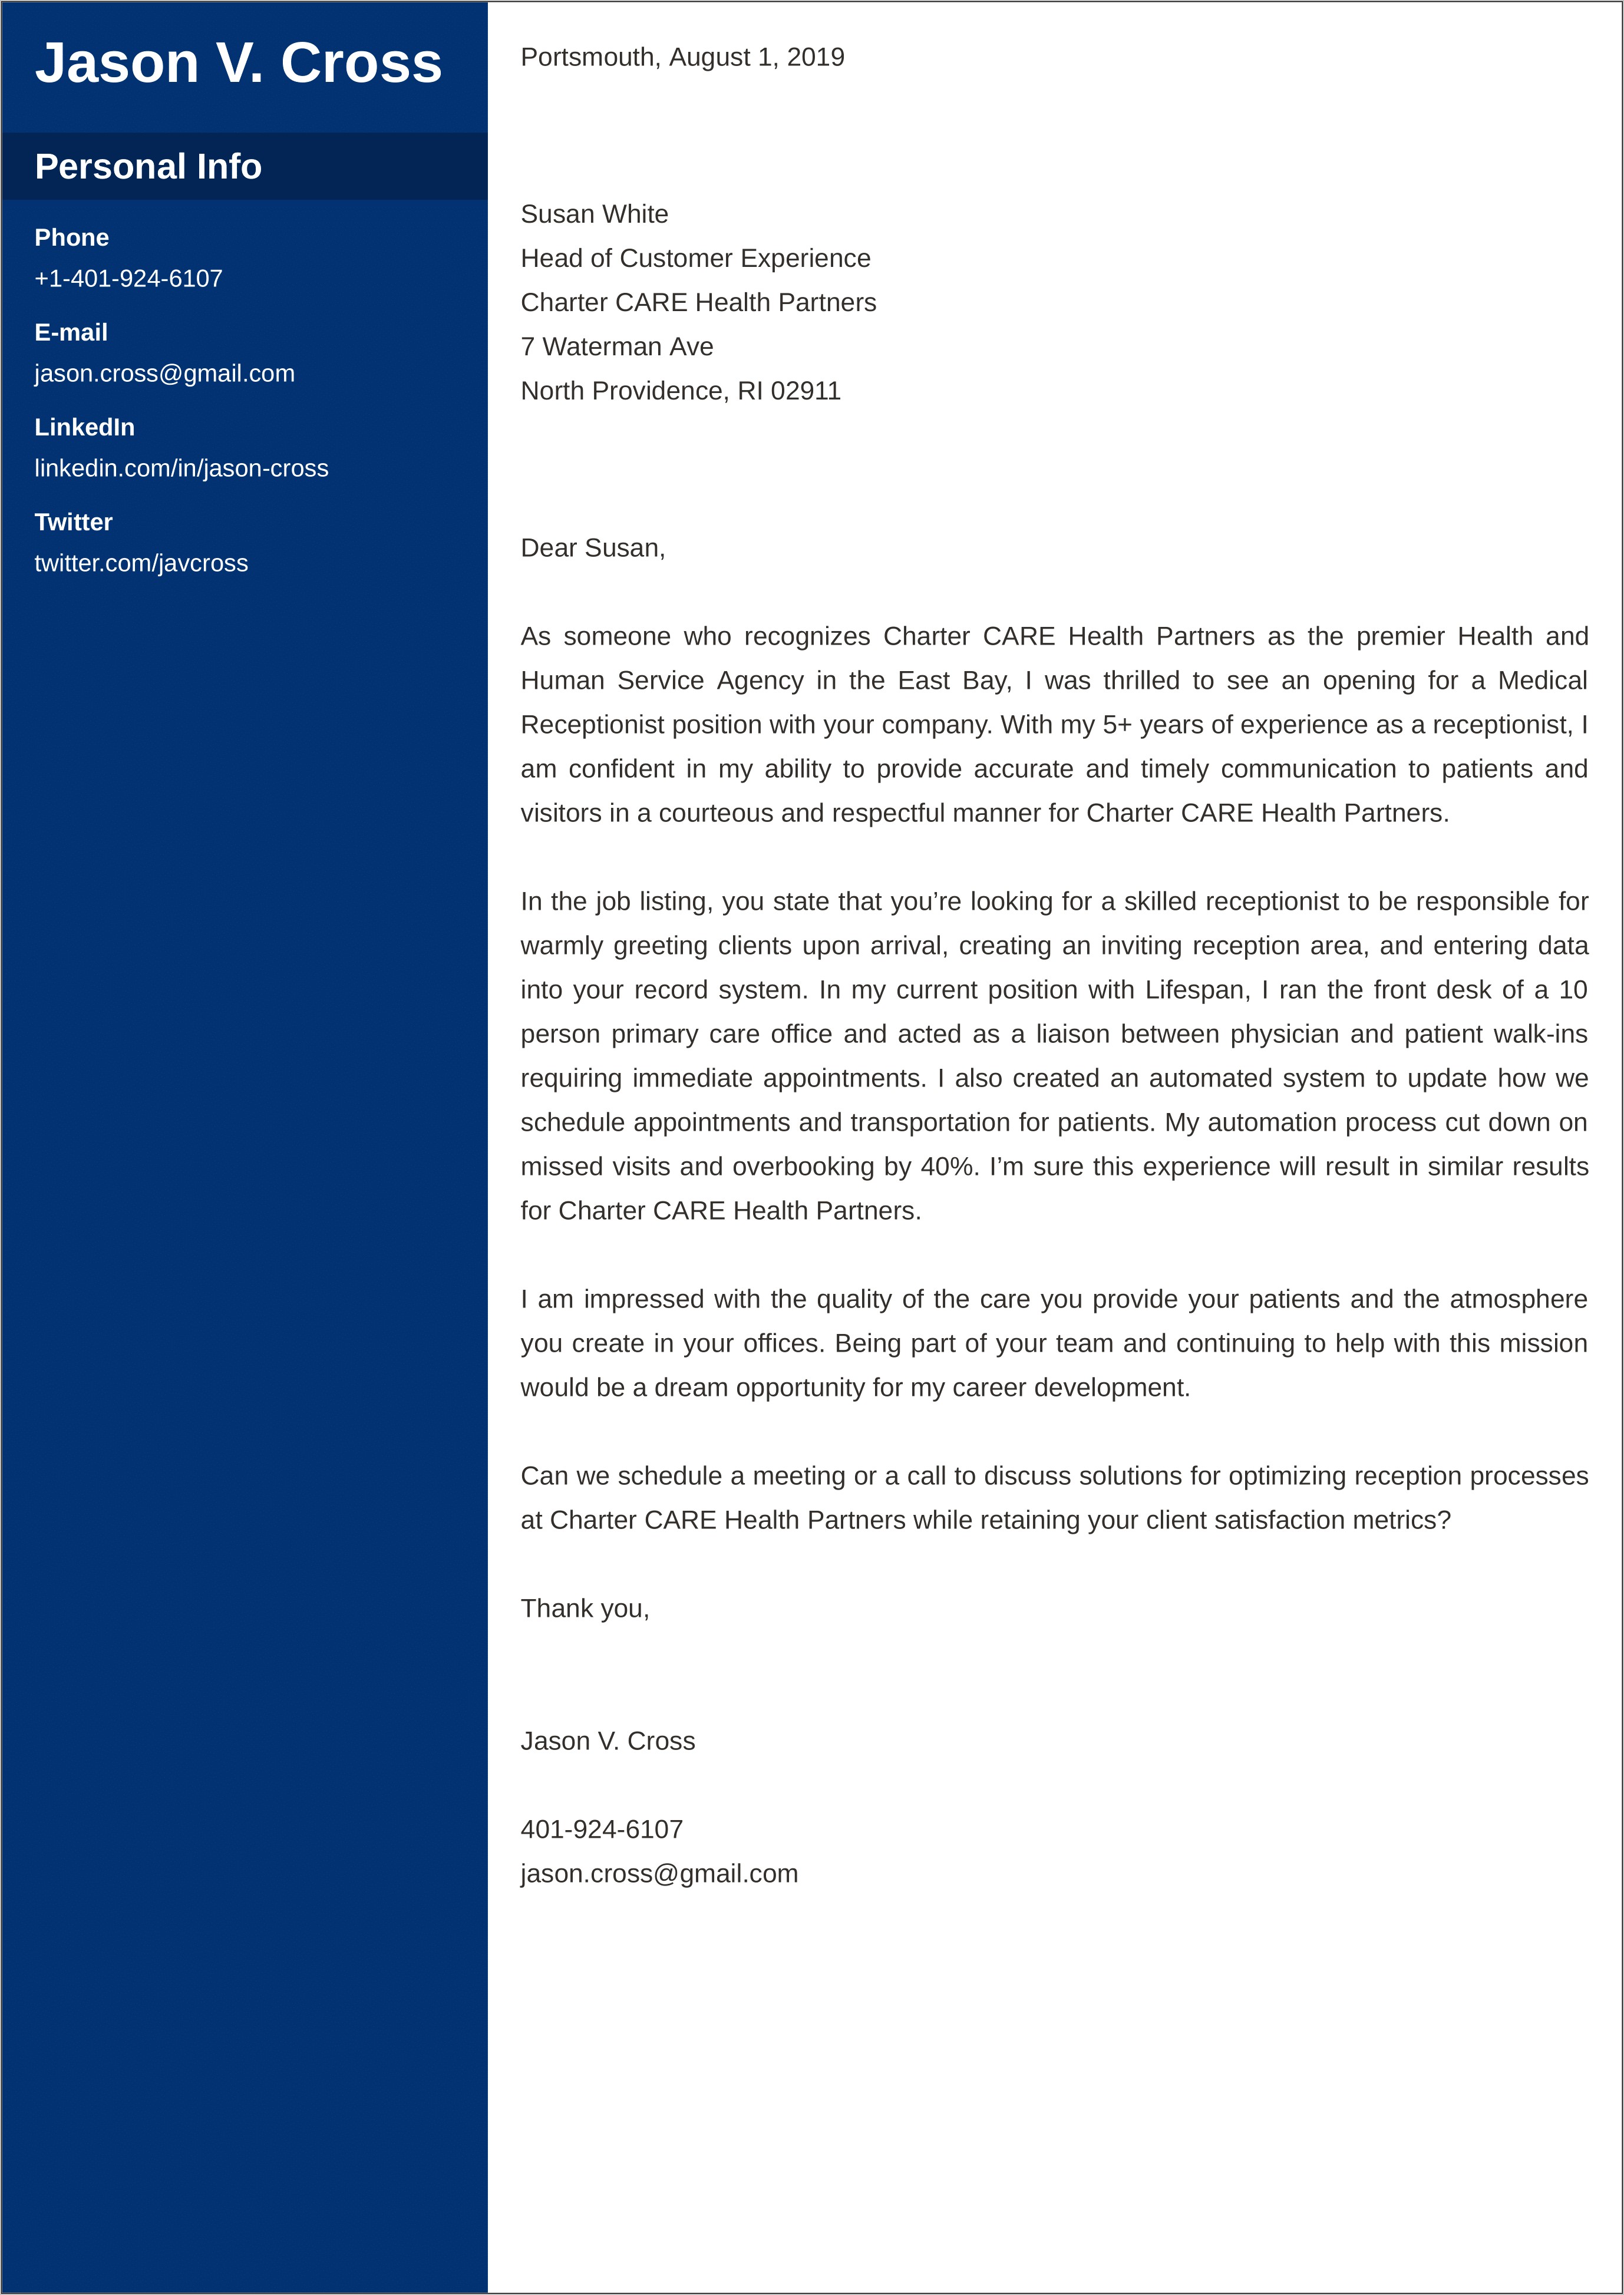 Email Cover Letter And Resume Sample